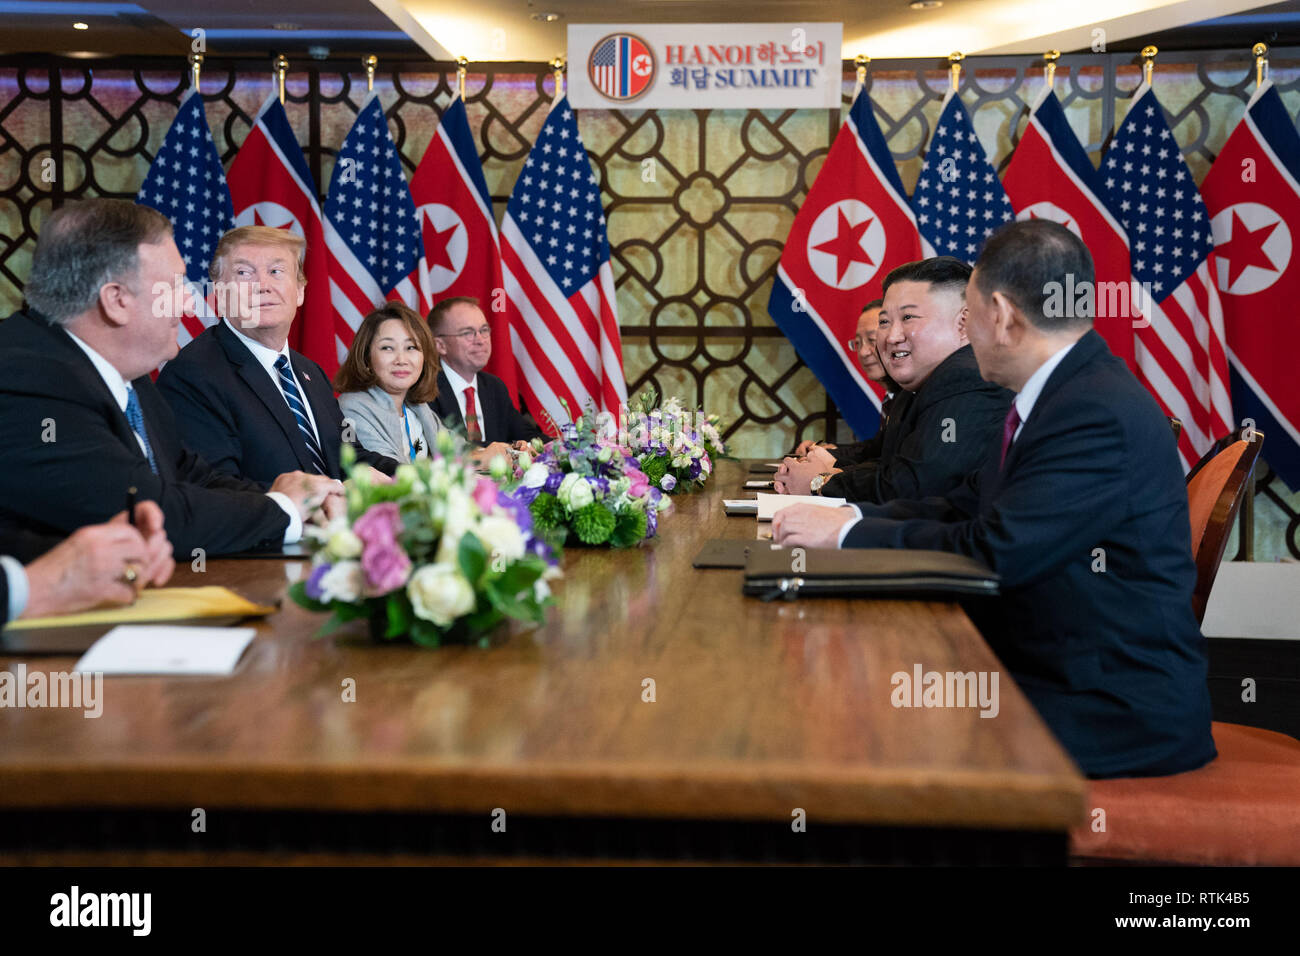 President Donald J. Trump and Kim Jong Un, Chairman of the State Affairs Commission of the Democratic PeopleÕs Republic of Korea, participate in an expanded bilateral meeting Thursday, Feb. 28, 2019, at the Sofitel Legend Metropole hotel in Hanoi.    People:  President Donald Trump, Kim Jong Un Stock Photo